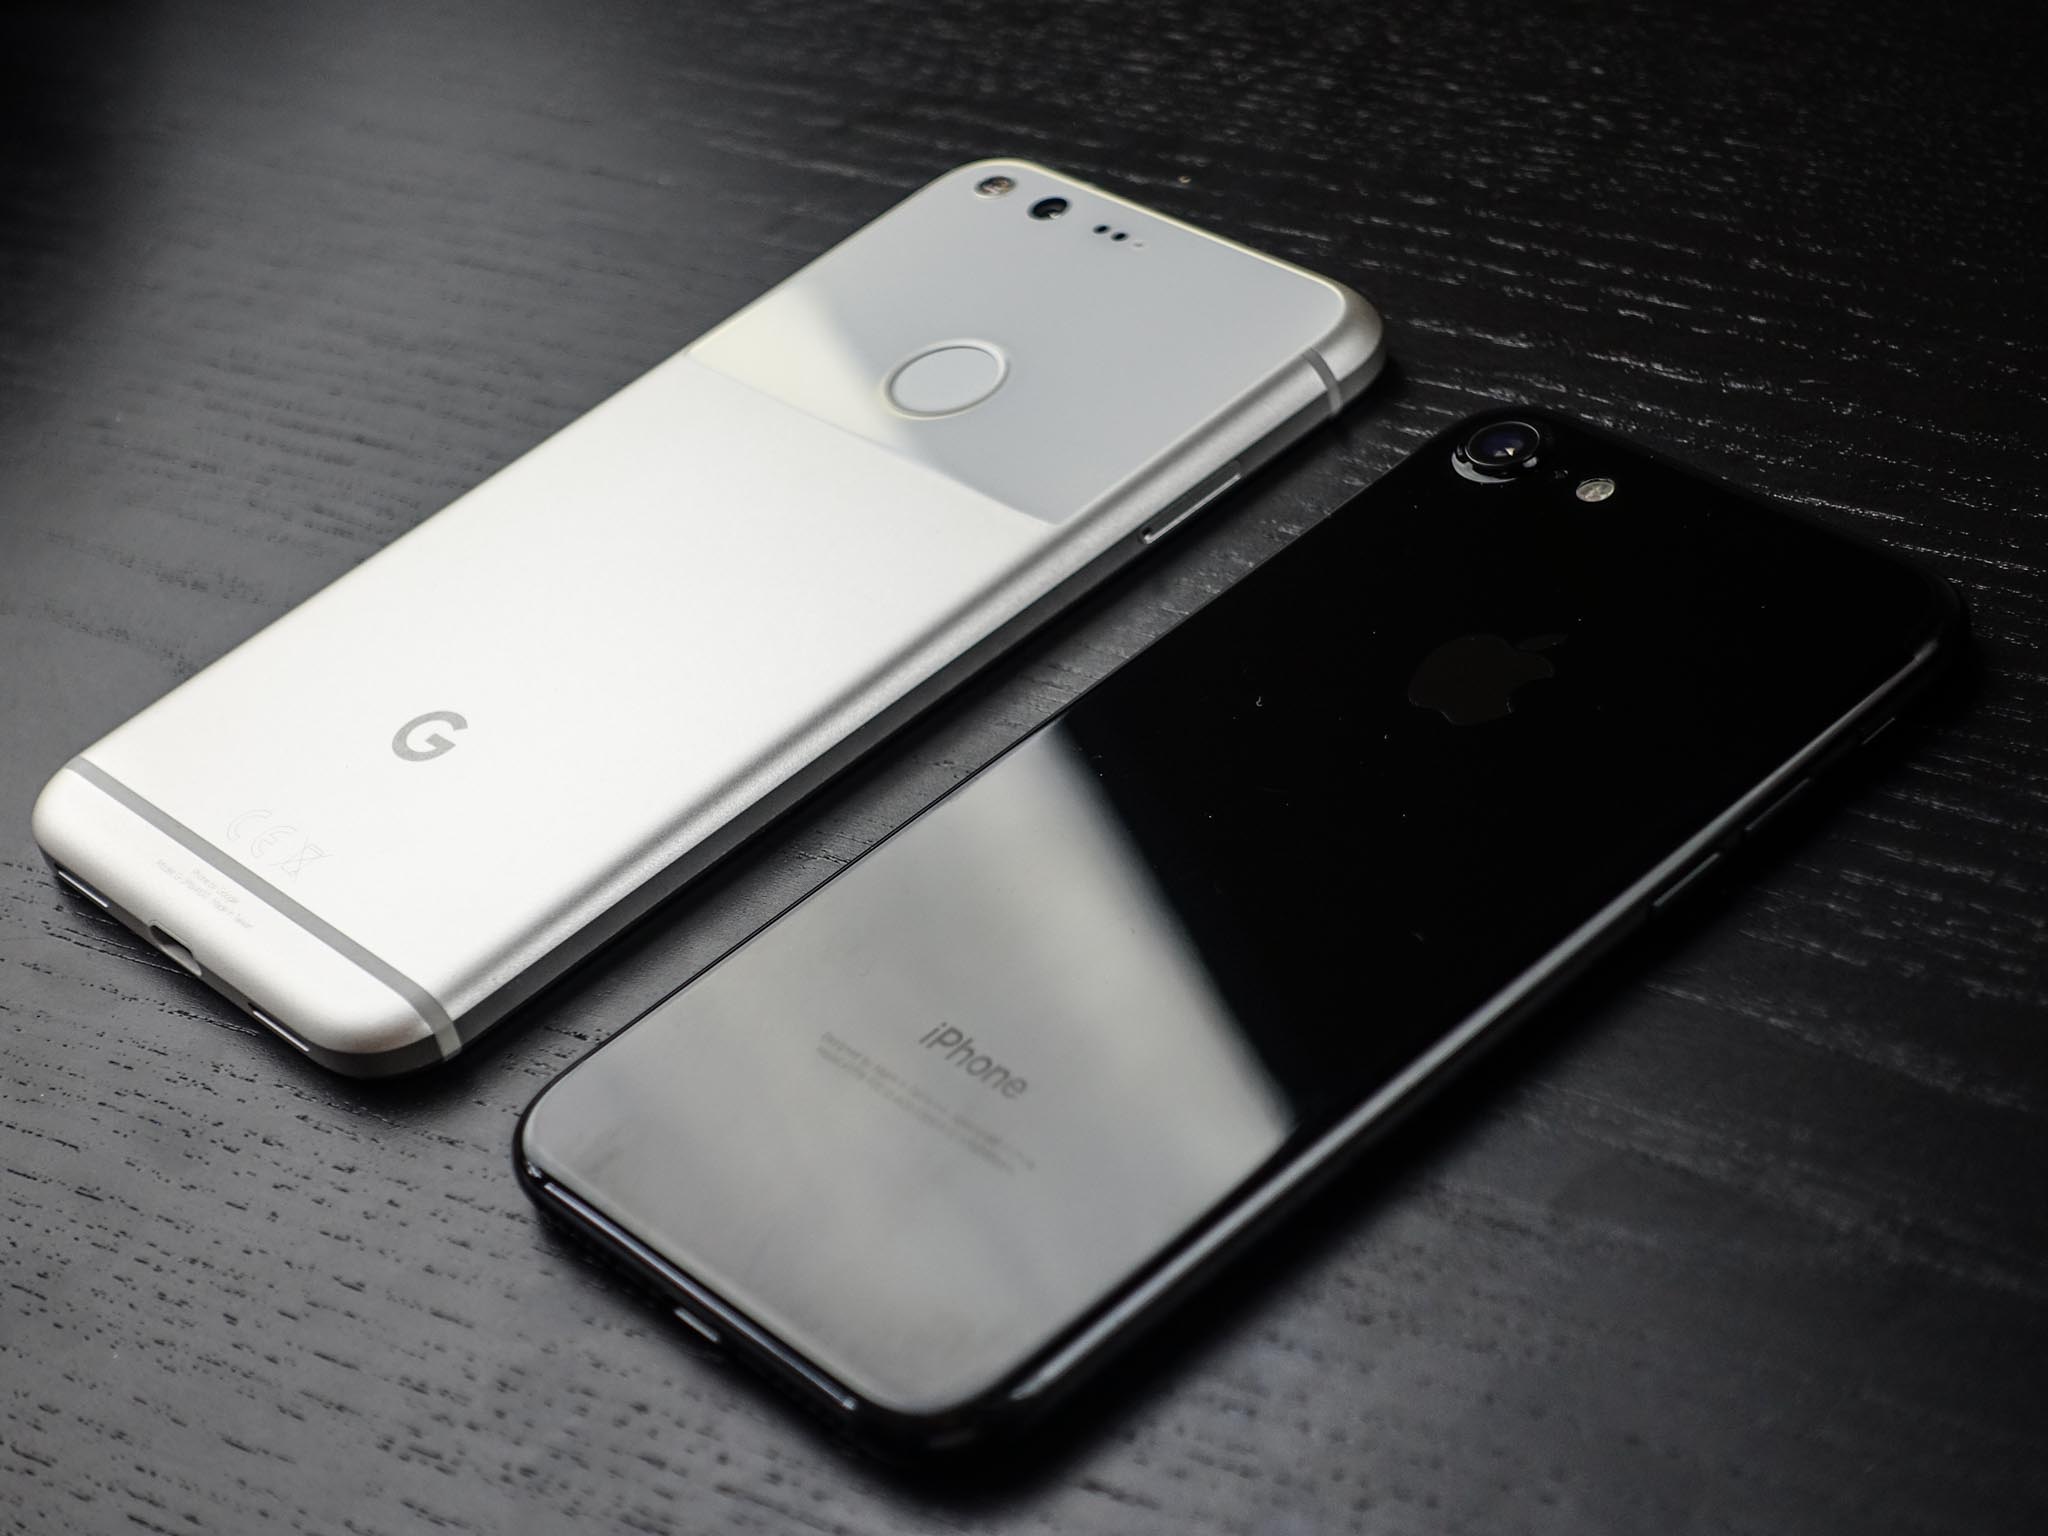 Google Pixel and iPhone 7